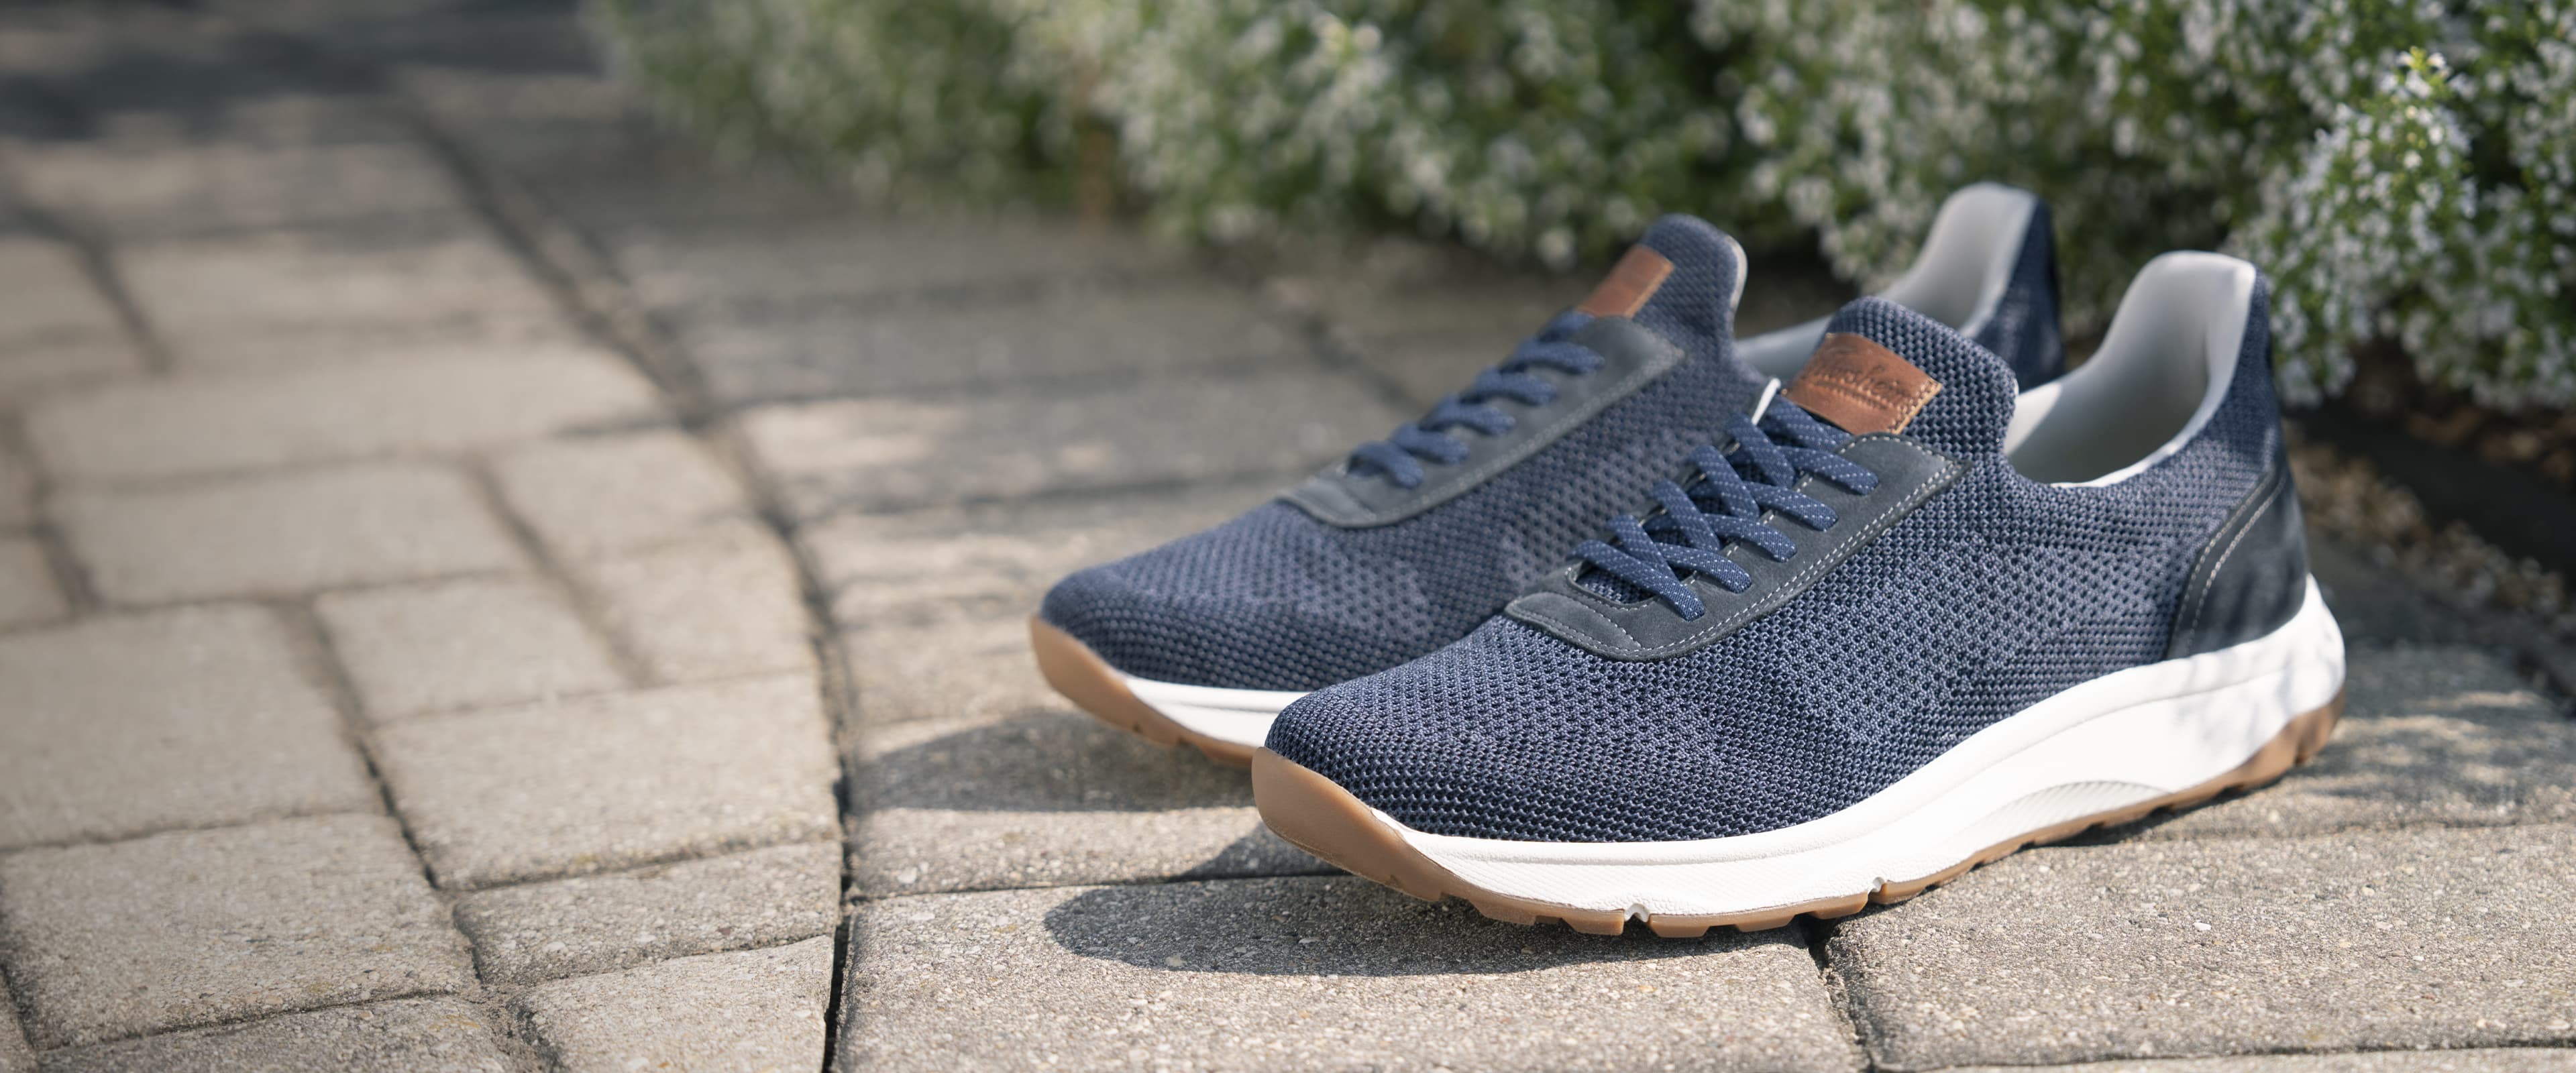 Click to shop Florsheim New Arrivals. Image features the Satellite Knit in navy.